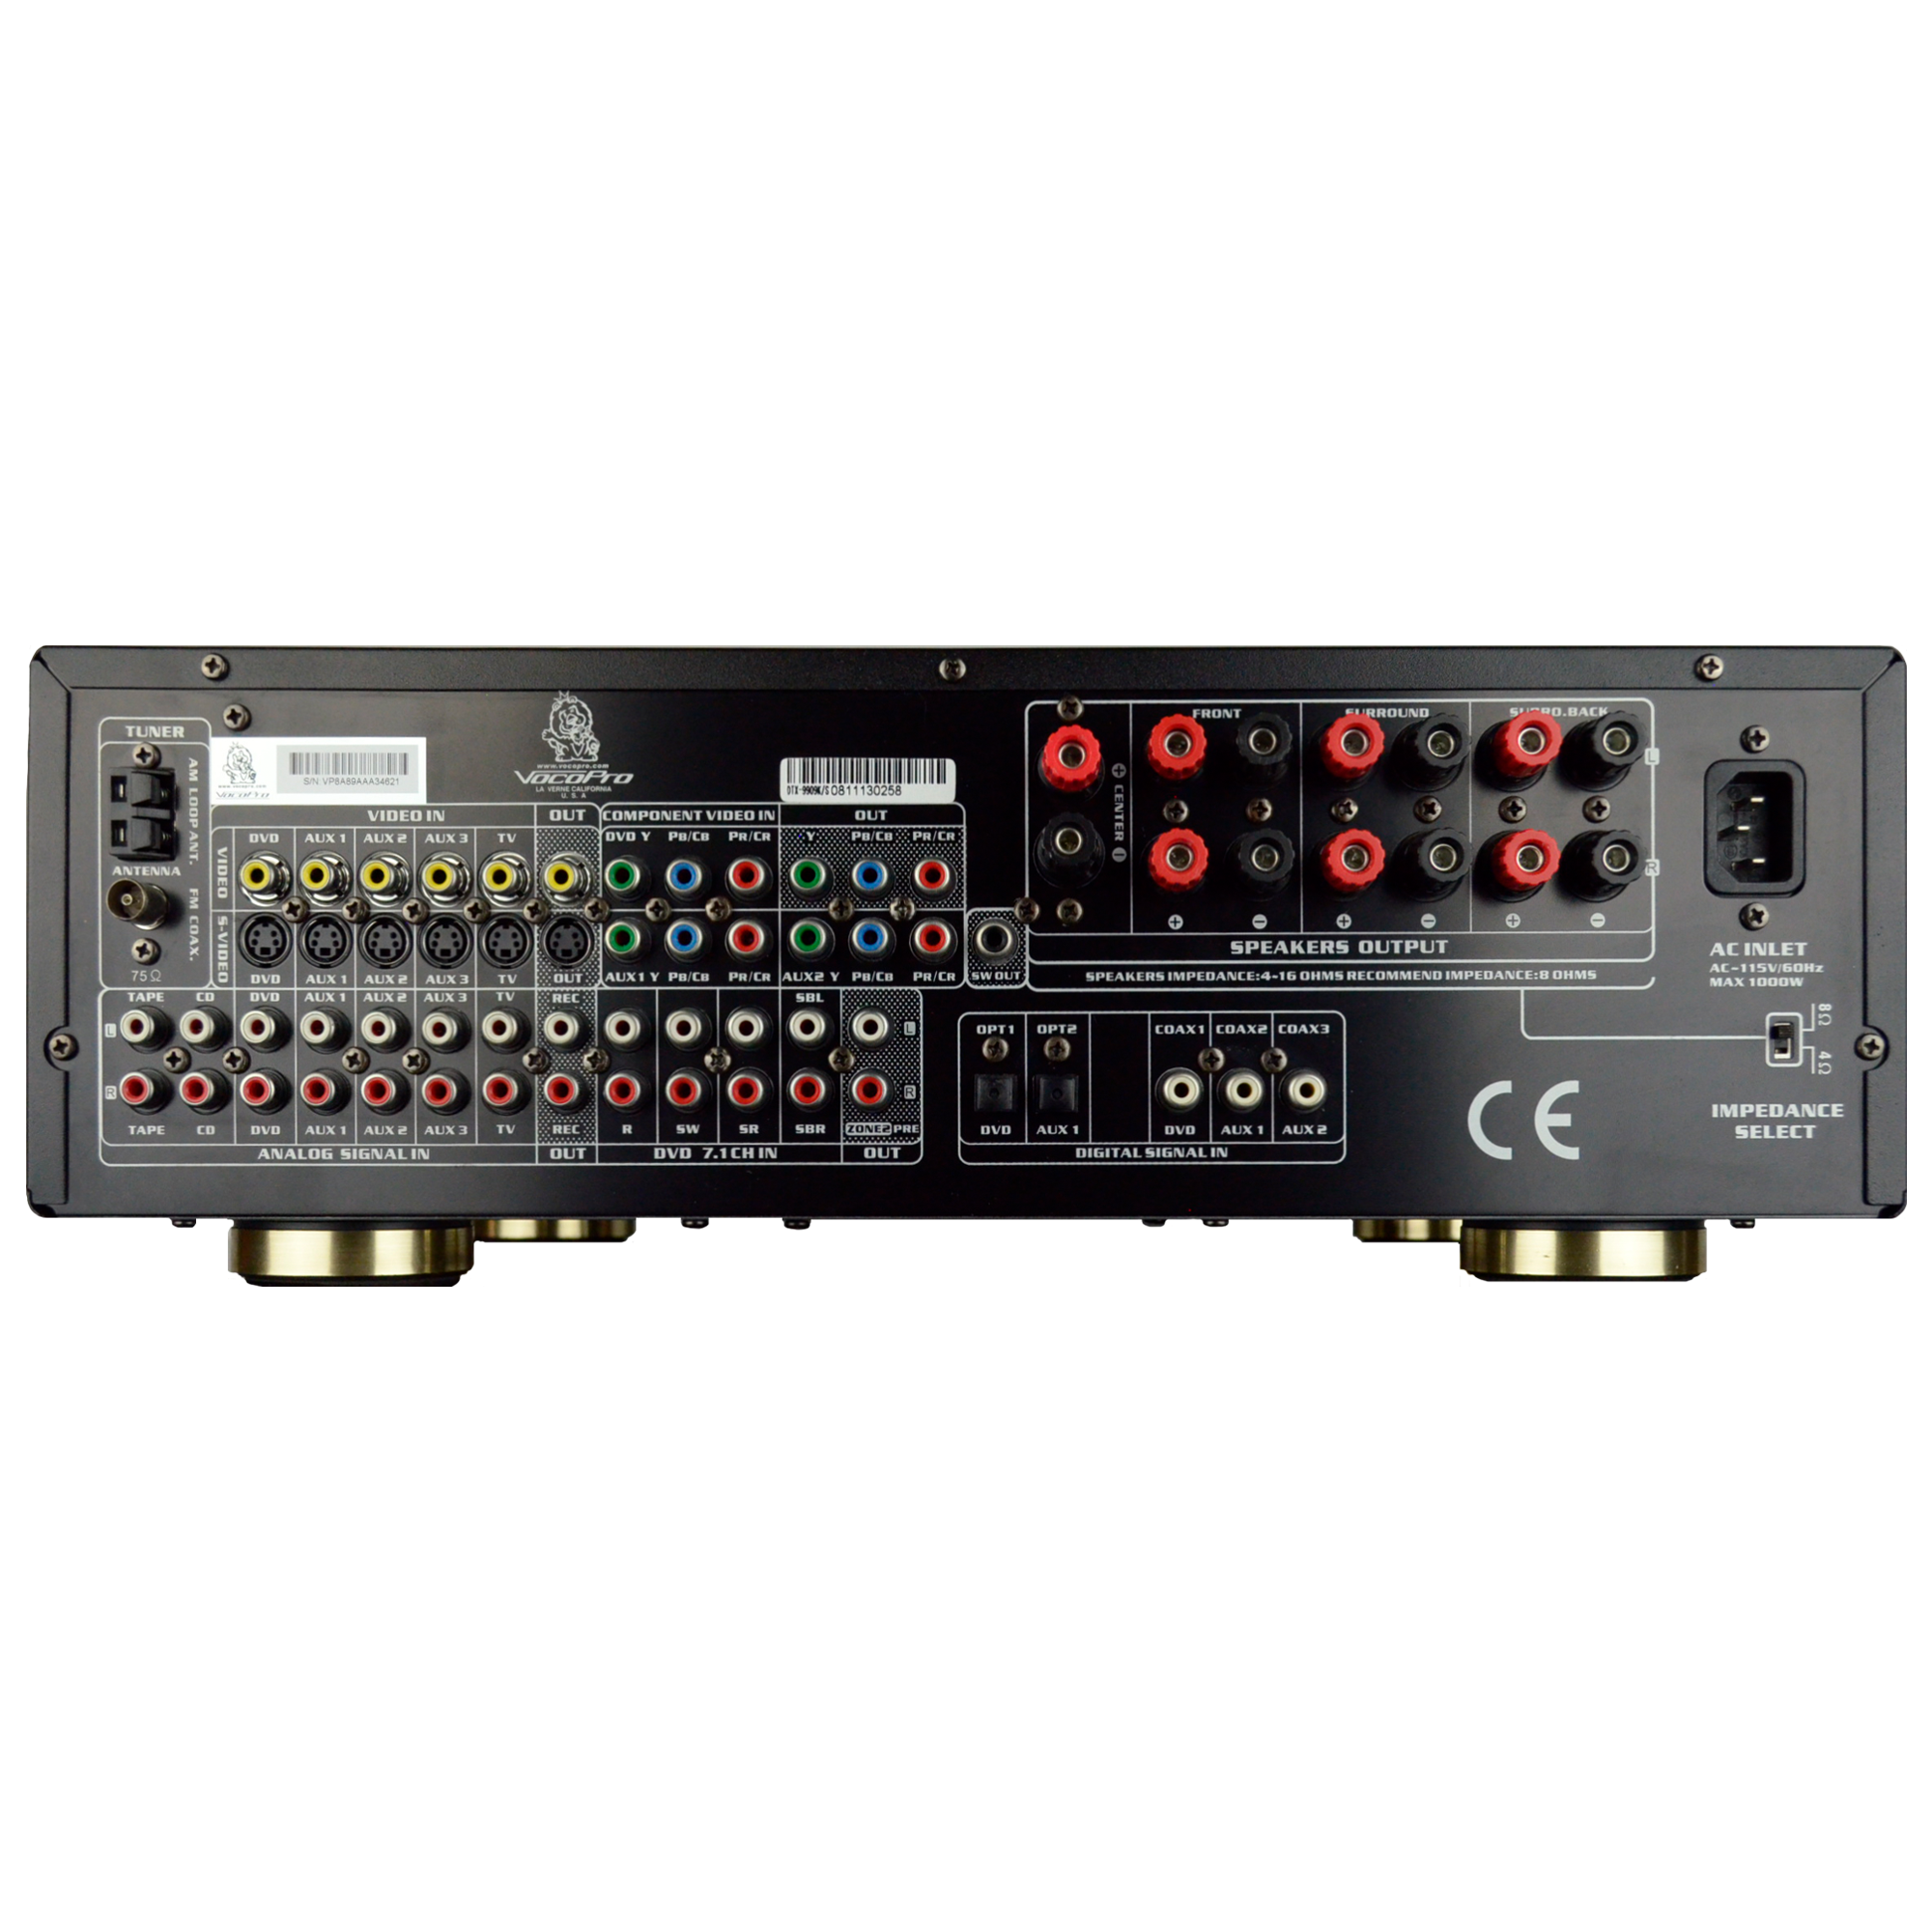 VocoPro DTX-9909K 700W MAX 7.1 Surround Sound Receiver with Professional Karaoke DSP Processing